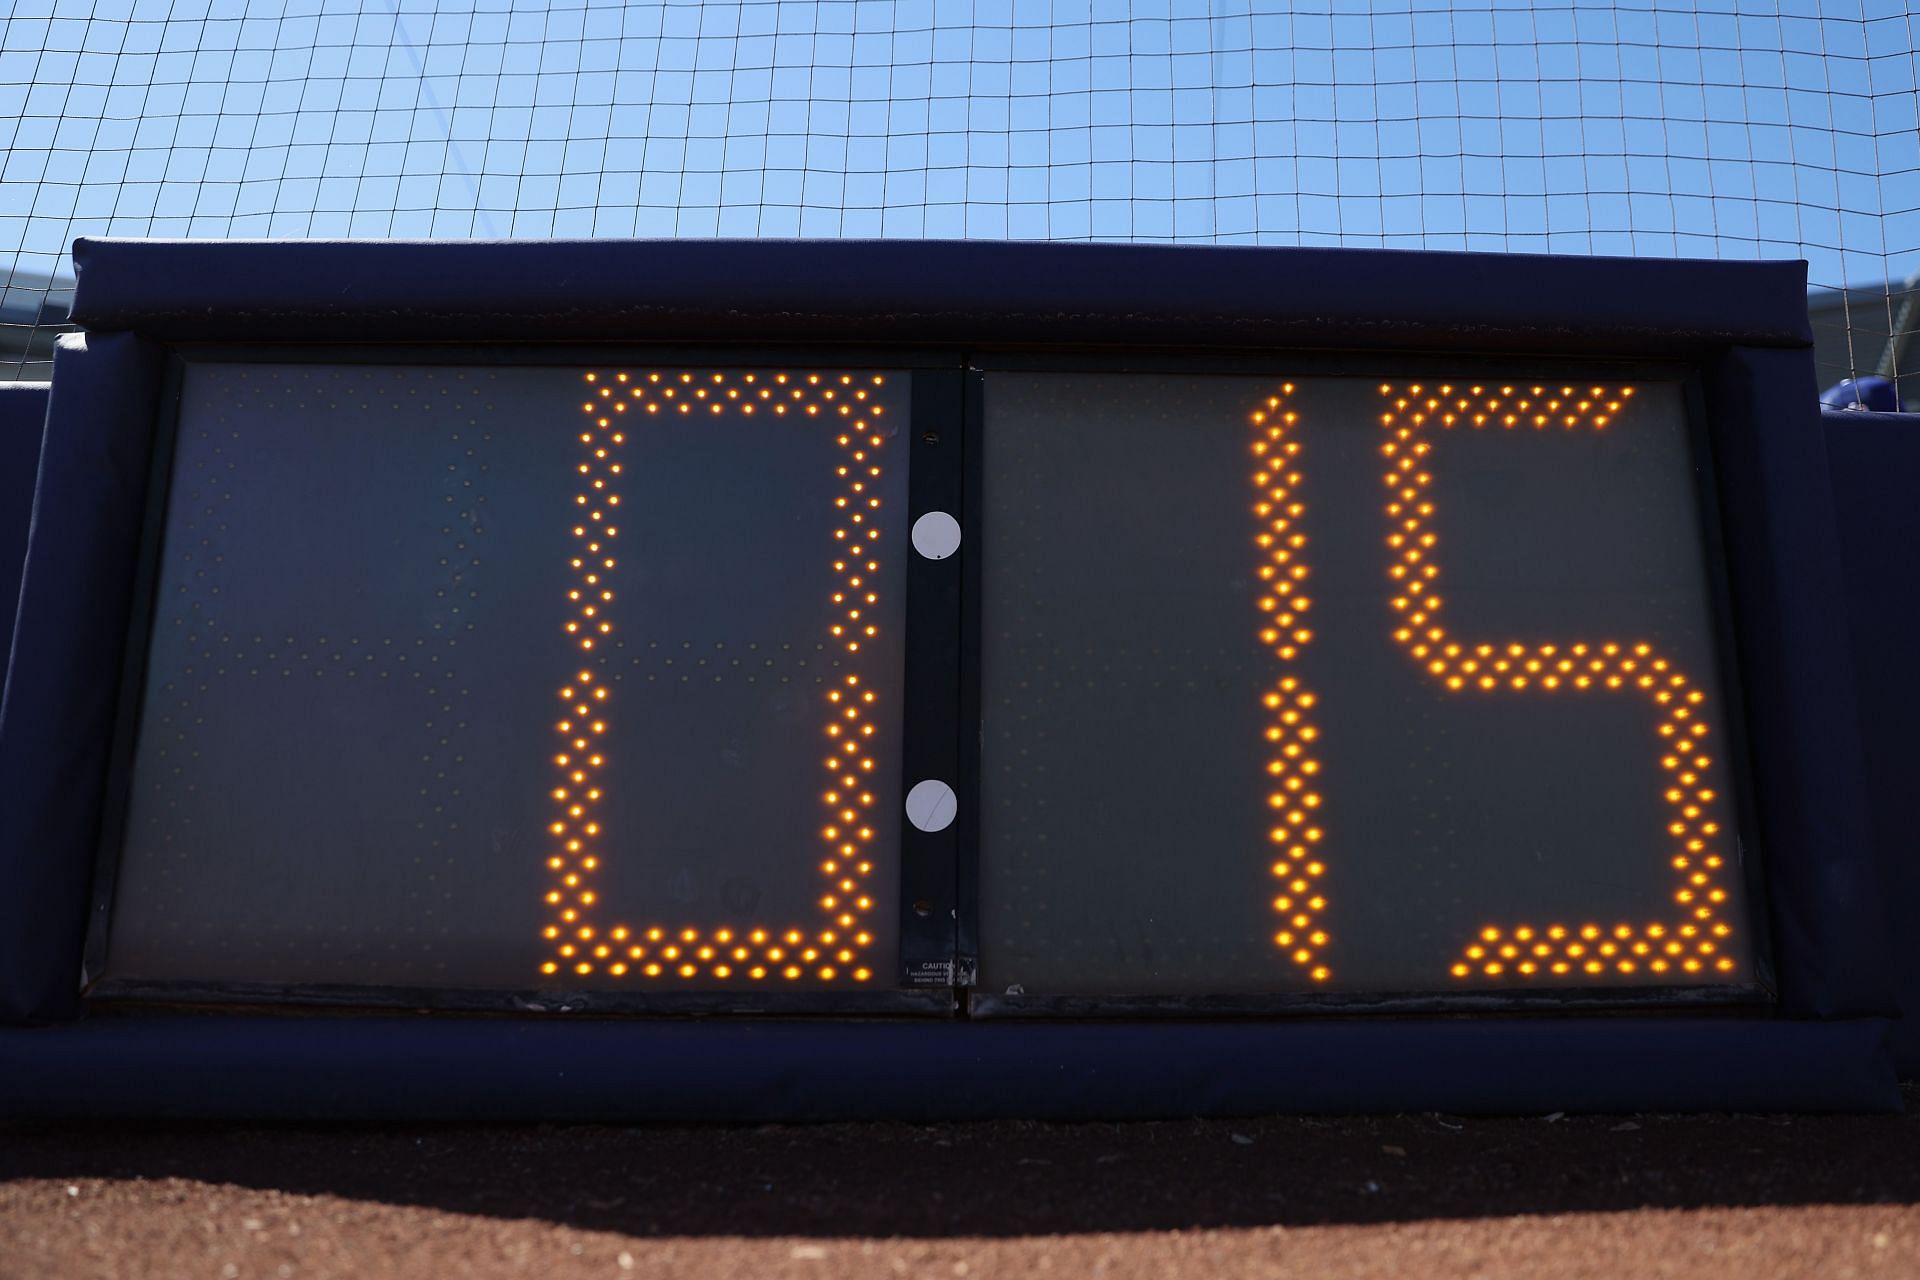 What happens with a pitch clock violation?